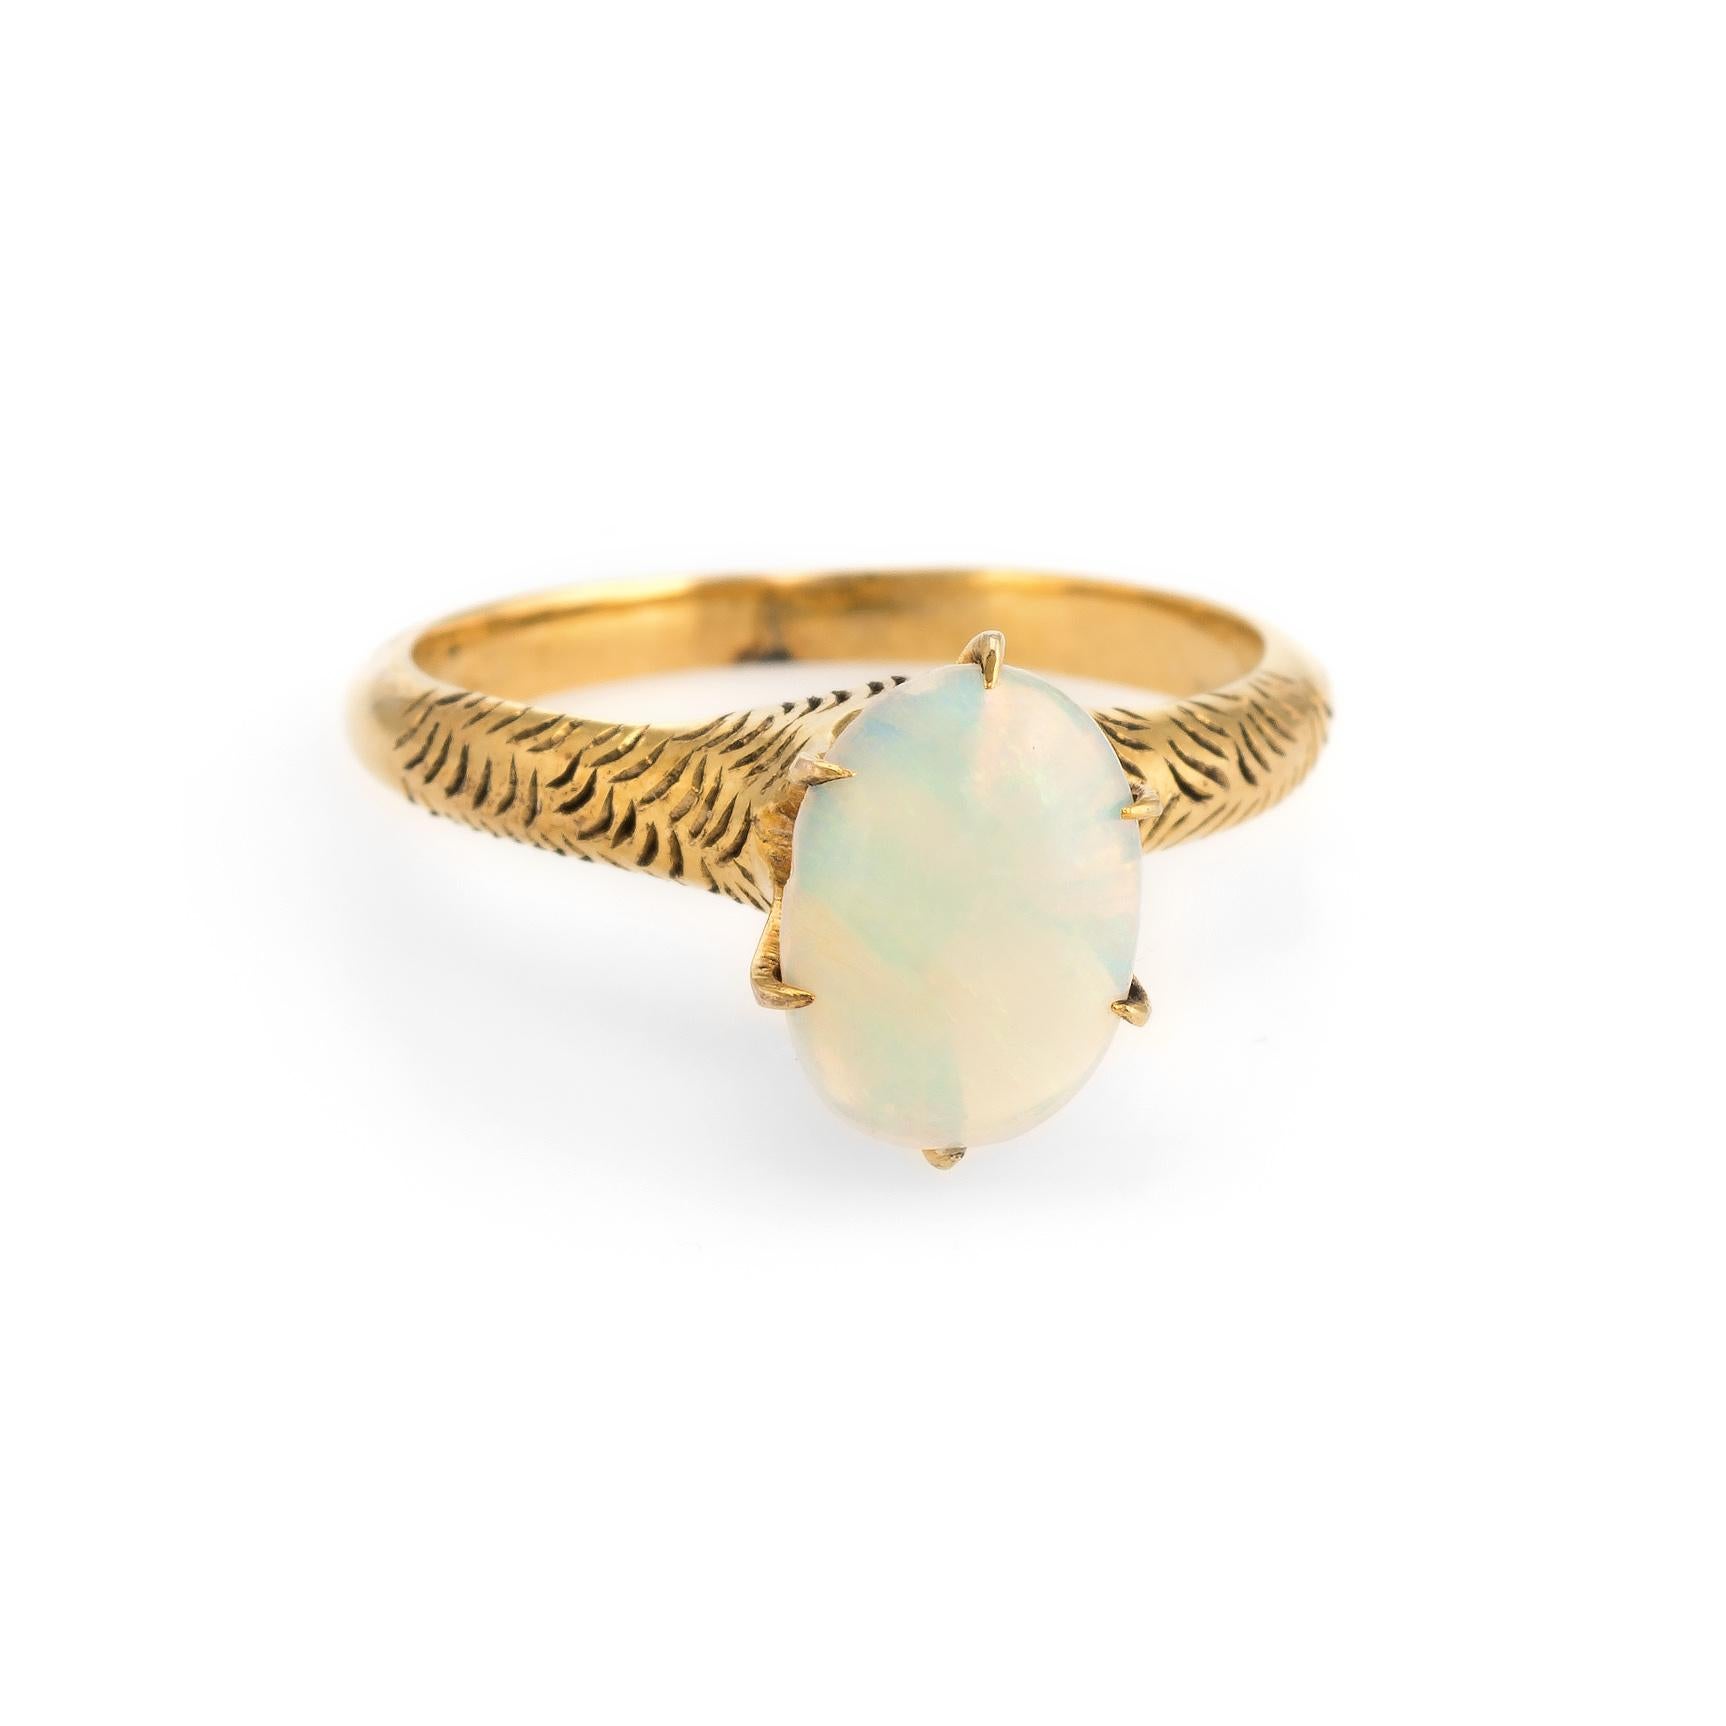 Finely detailed antique Victorian opal ring (circa 1880s to 1900s), crafted in 14 karat yellow gold. 

Natural opal measures 9.5mm x 6mm (estimated at 1.50 carats). The opal is in excellent condition and free of cracks or chips.  

The simple and